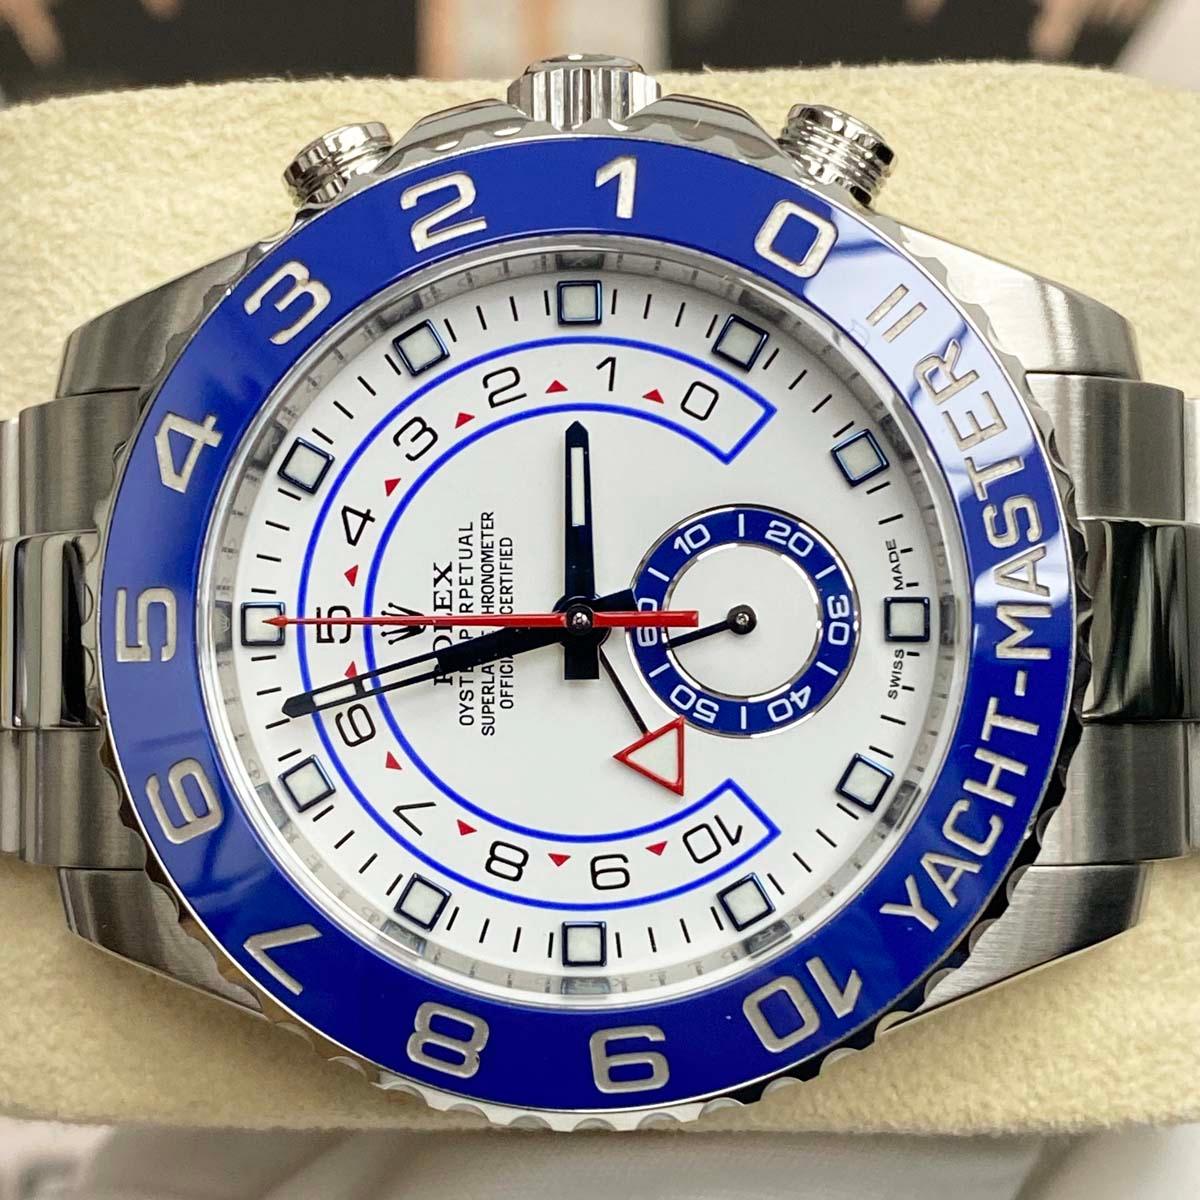 Rolex Yacht-Master II 44mm 116680 Blue Hands White Dial Pre-Owned - Gotham Trading 